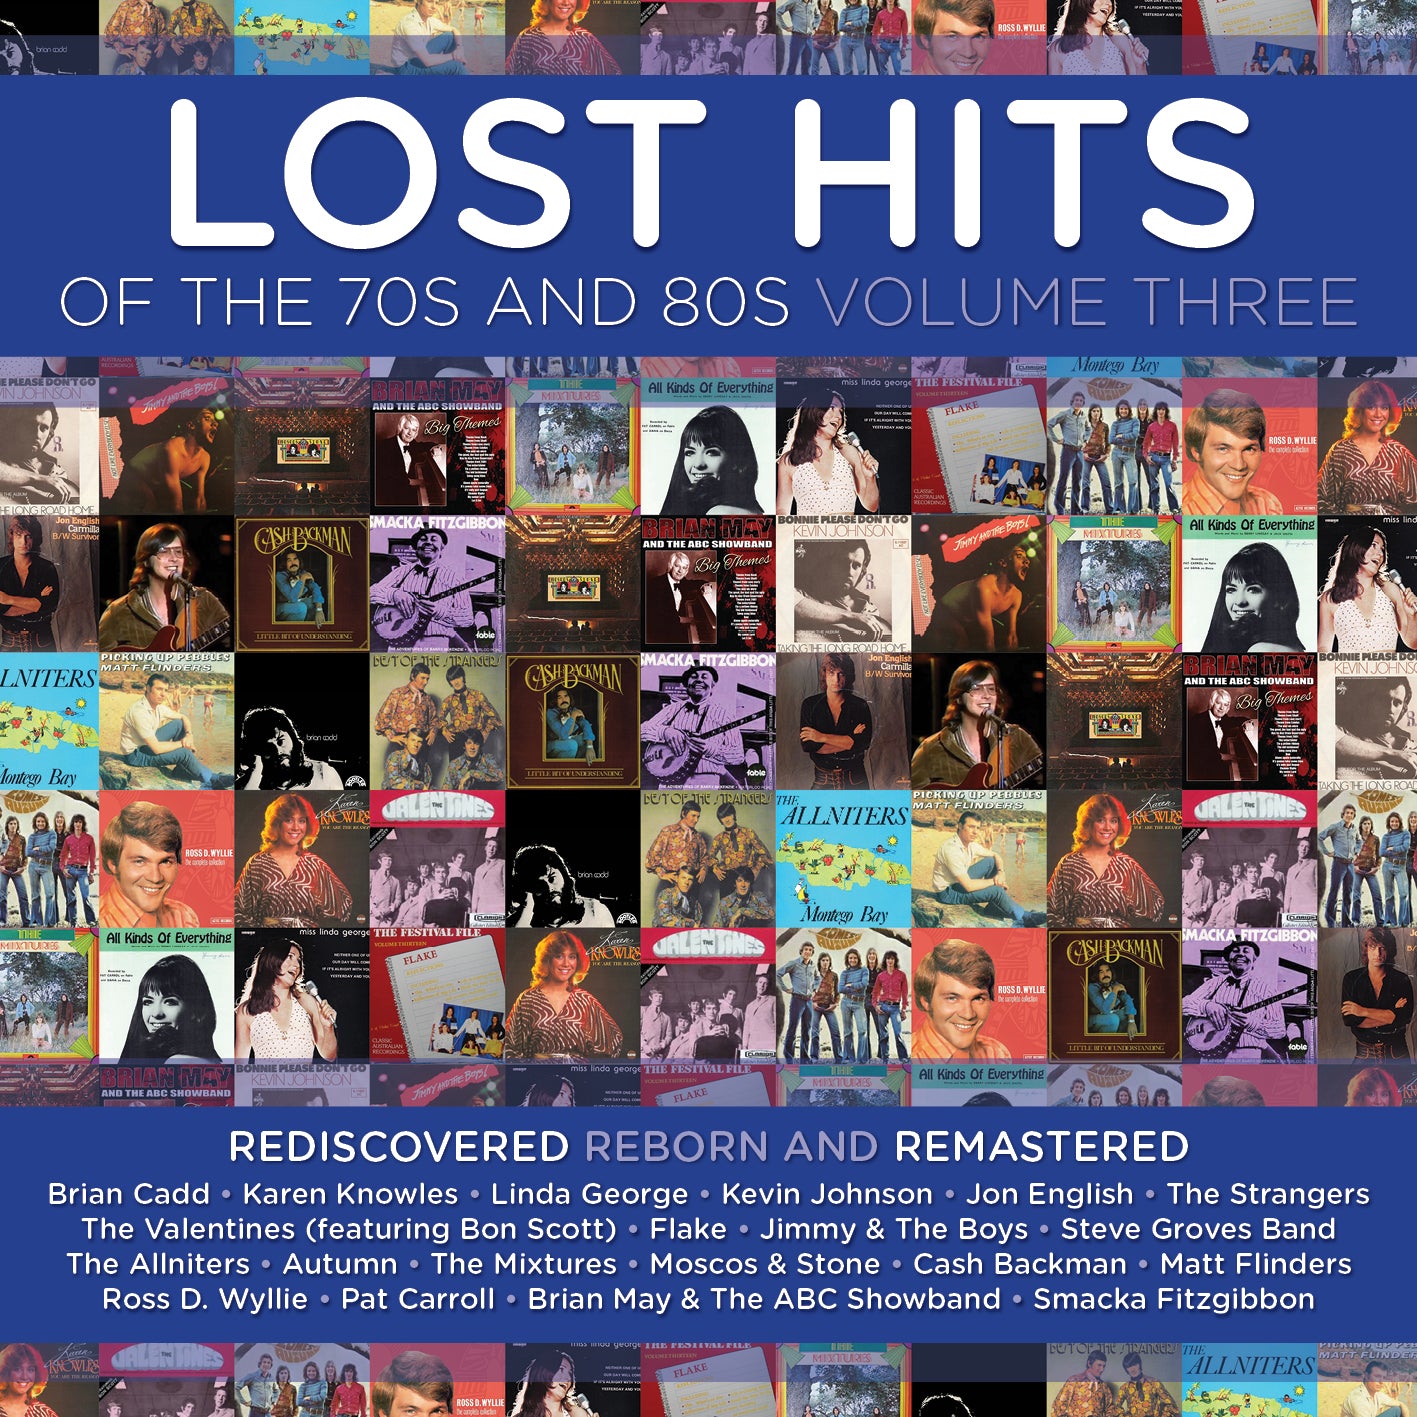 VARIOUS ARTISTS - LOST HITS OF THE 70S AND 80S (VOLUME THREE)